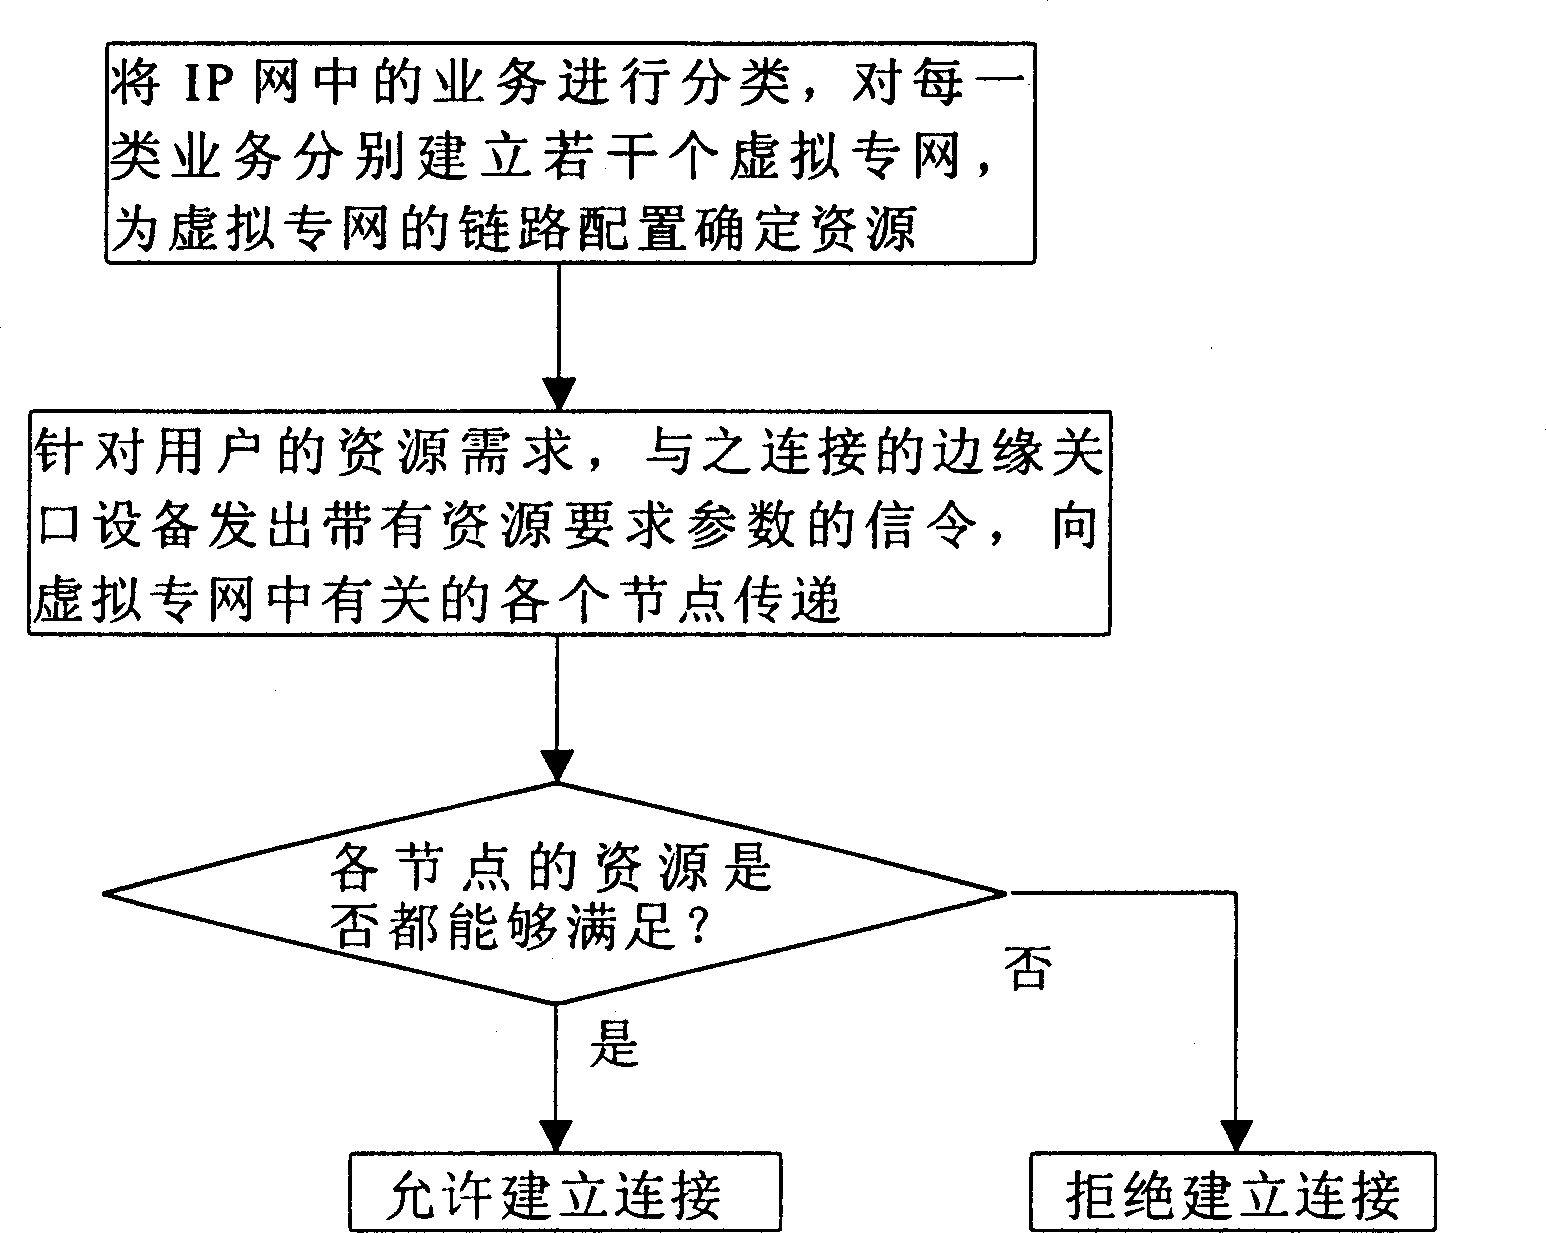 Resource managing method based on signal mechanism in IP telecommunication network system